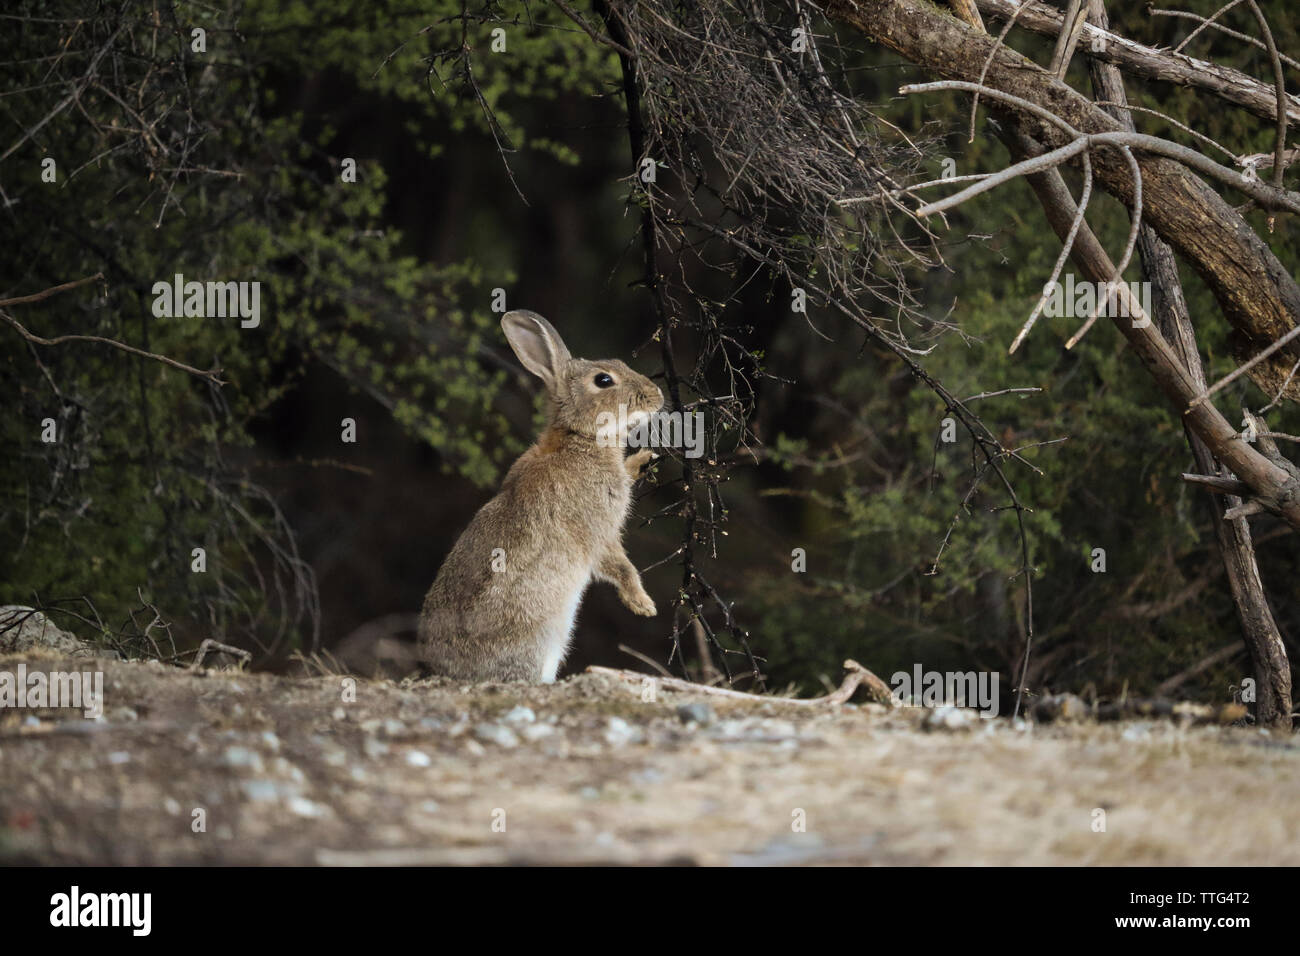 Side view of rabbit rearing up on field Stock Photo